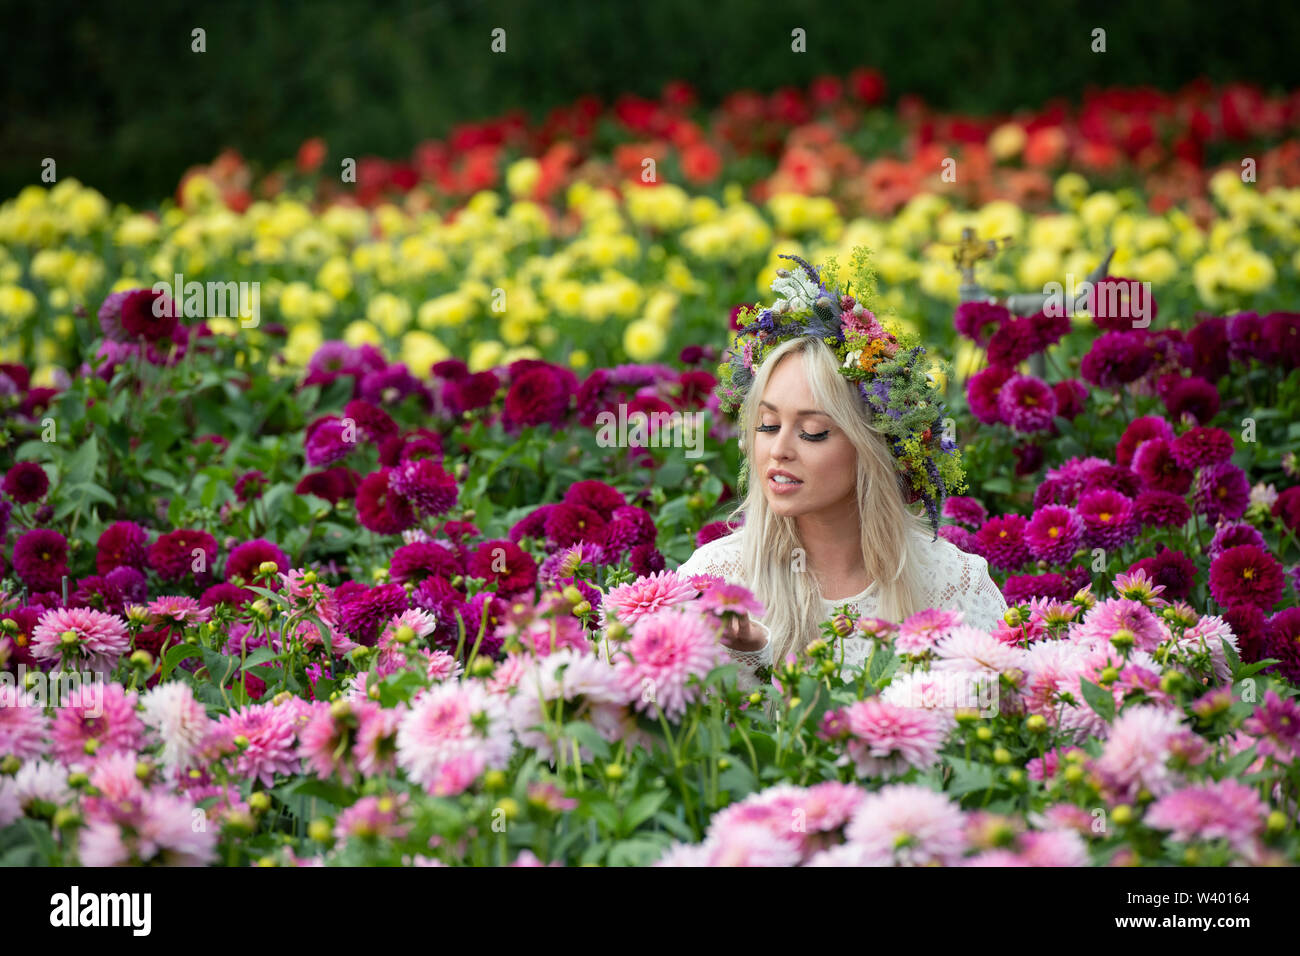 Female model with a floral headdress amongst the dahlia flower display at the RHS Tatton park flower show 2019. Knutsford, Cheshire, UK Stock Photo